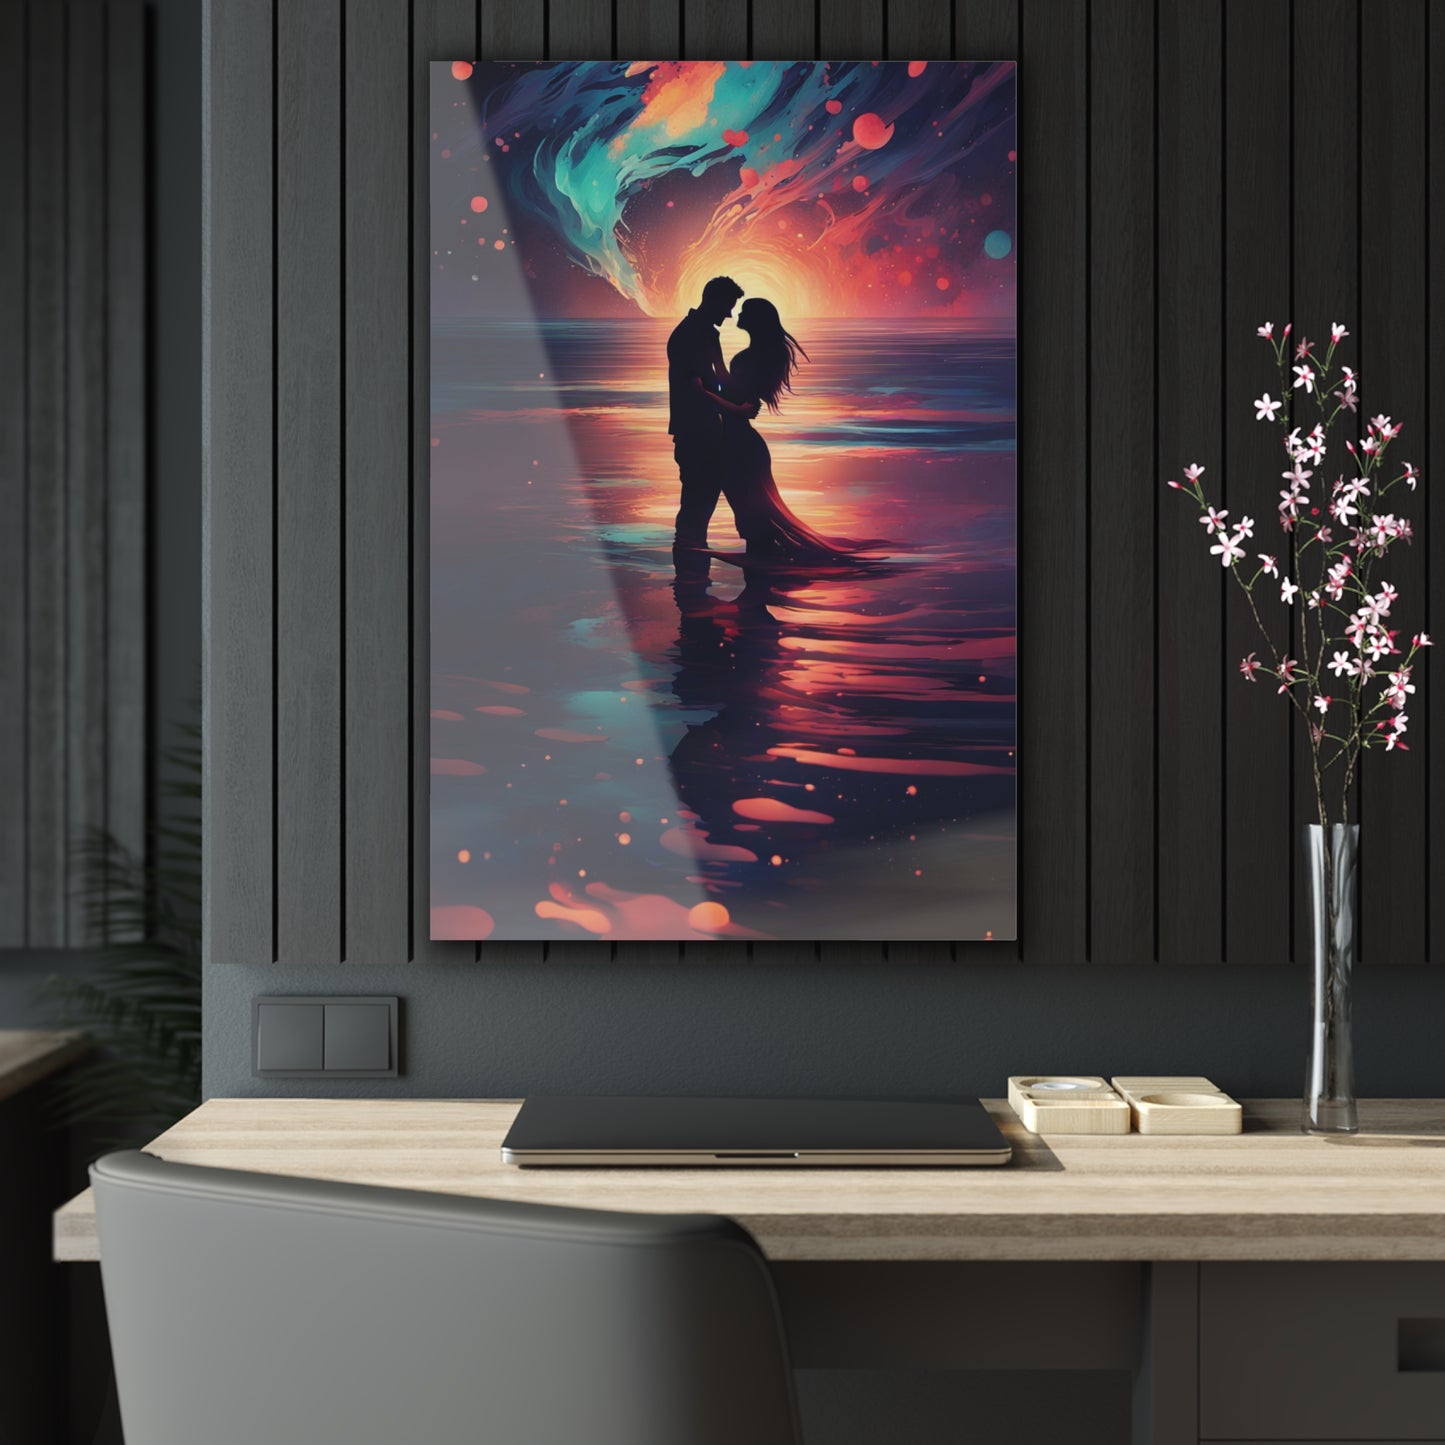 Beach Paradise With You -M/F Couple - Love in All Forms Collection - Acrylic Art Print-Art with Depth-Romantic Couple Bedroom Decor -